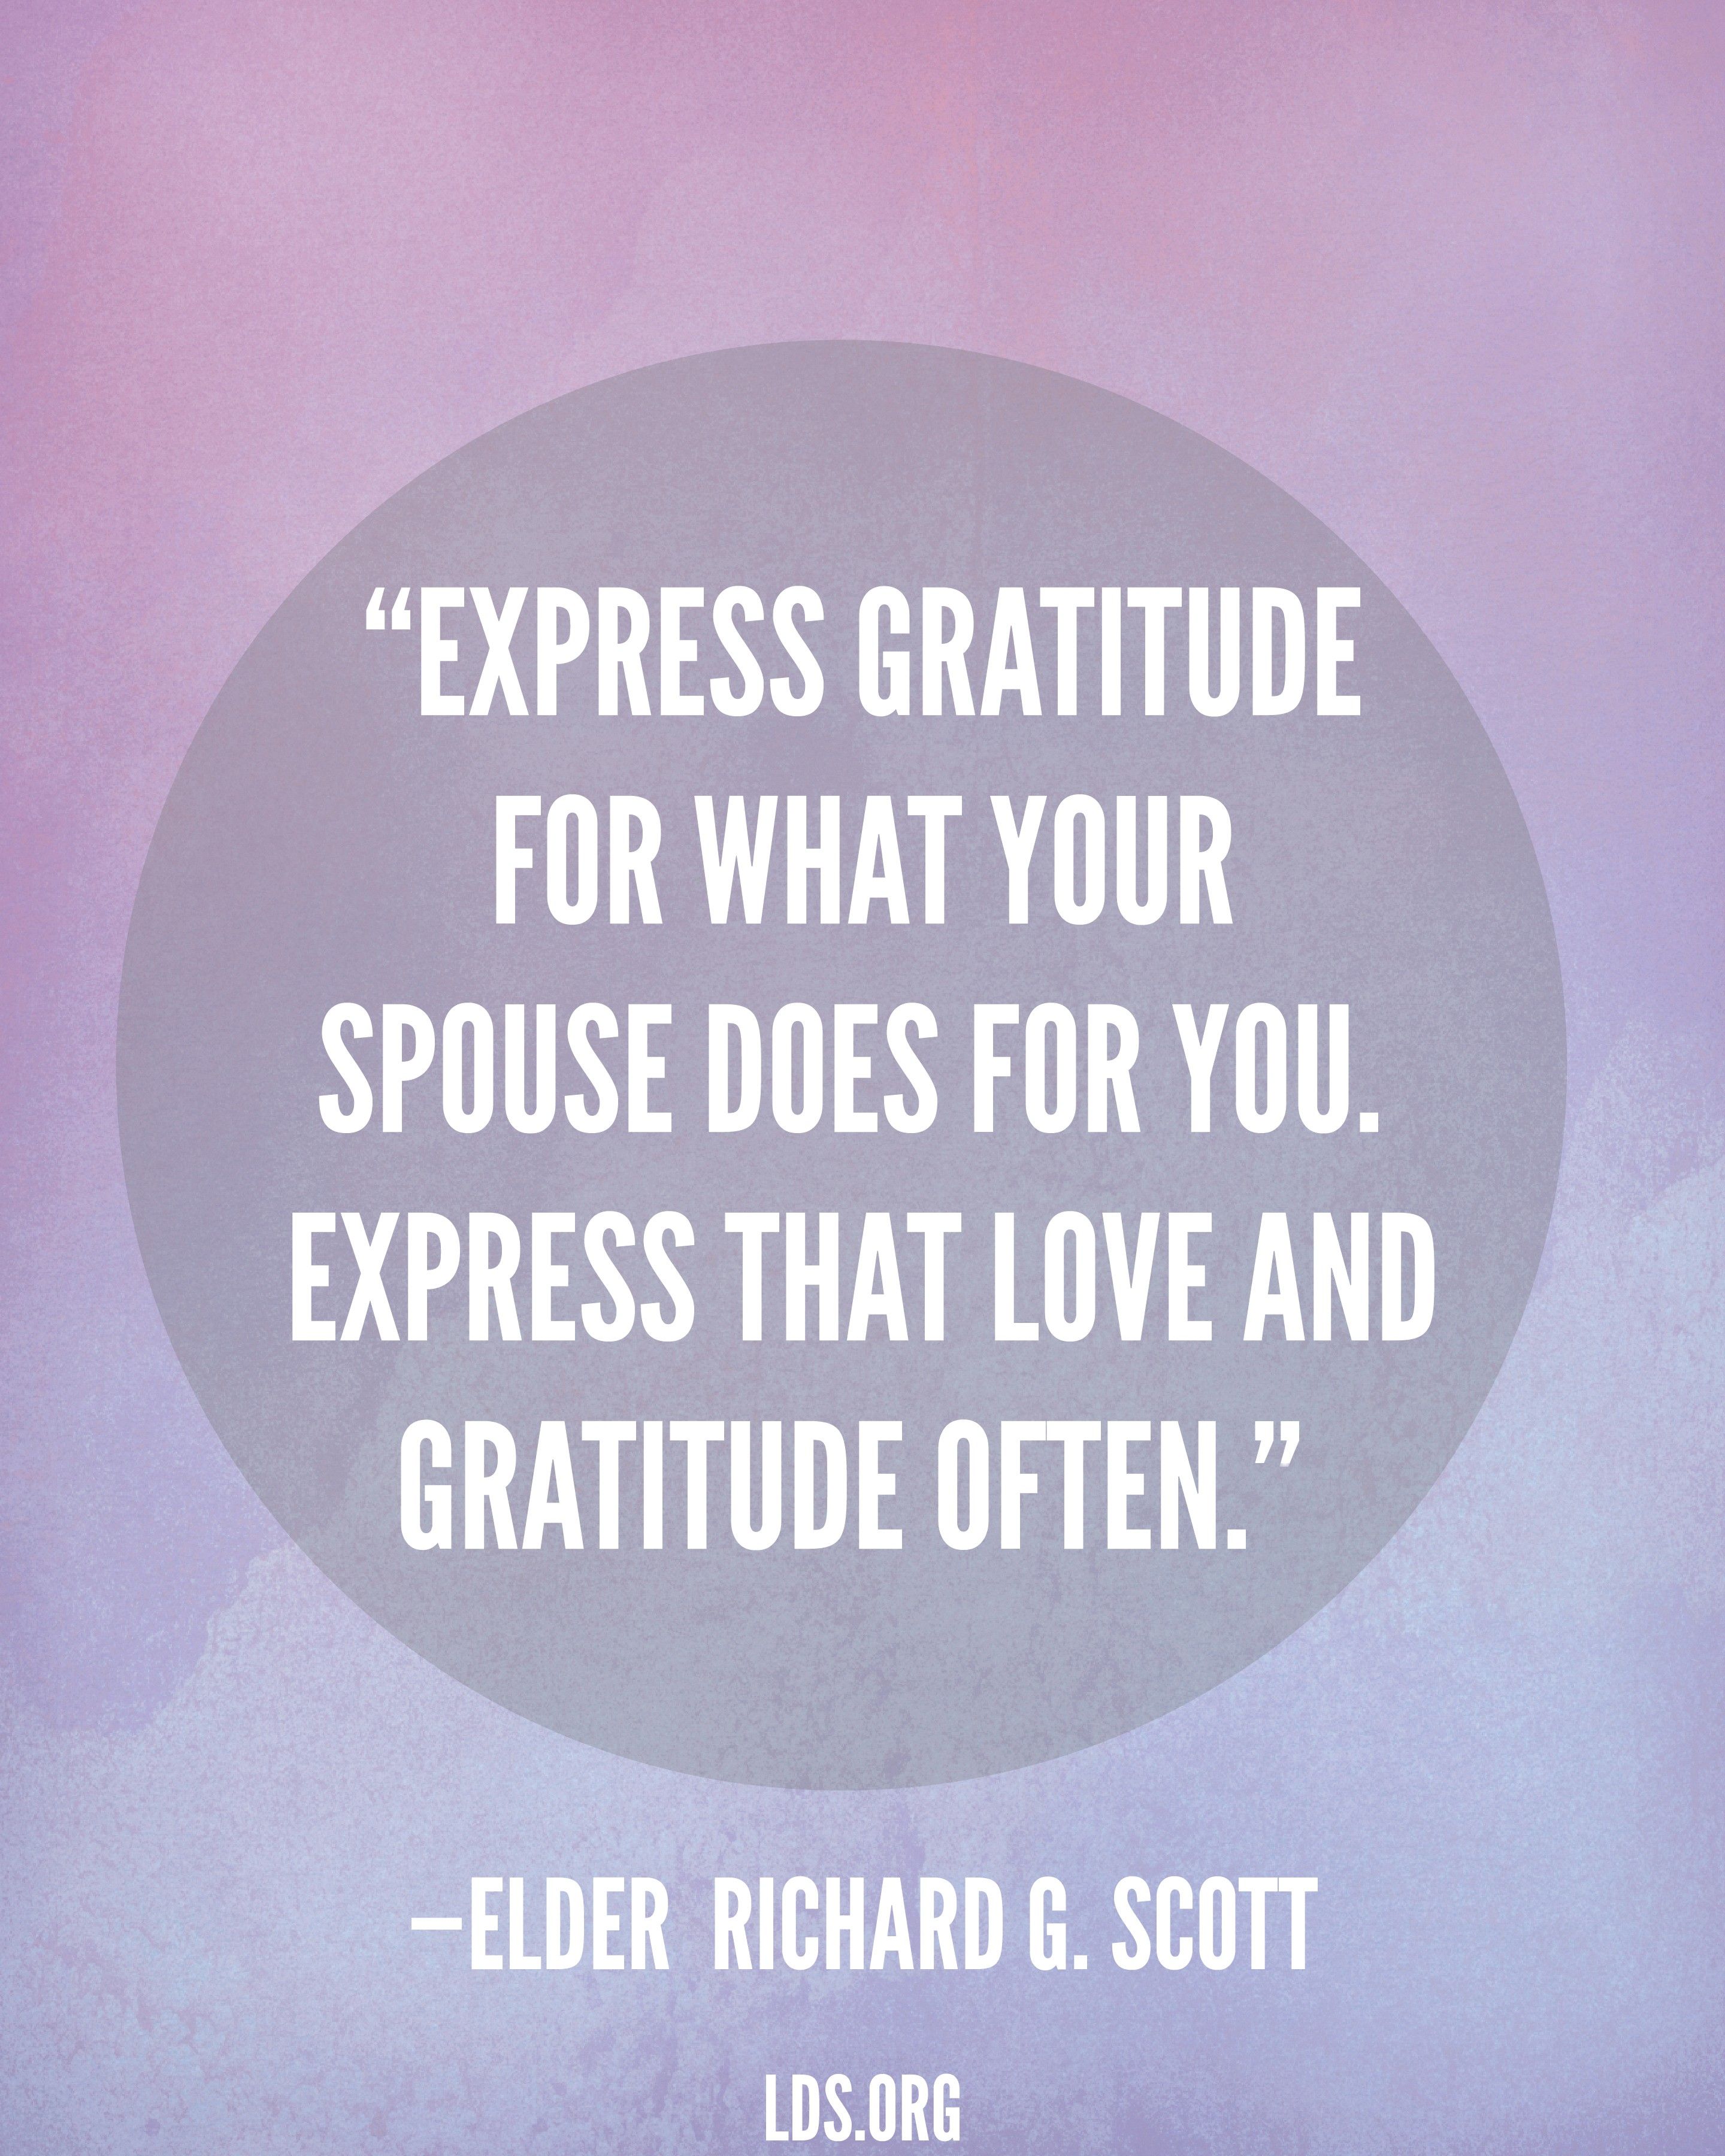 “Express gratitude for what your spouse does for you. Express that love and gratitude often.”—Elder Richard G. Scott, “The Eternal Blessings of Marriage”